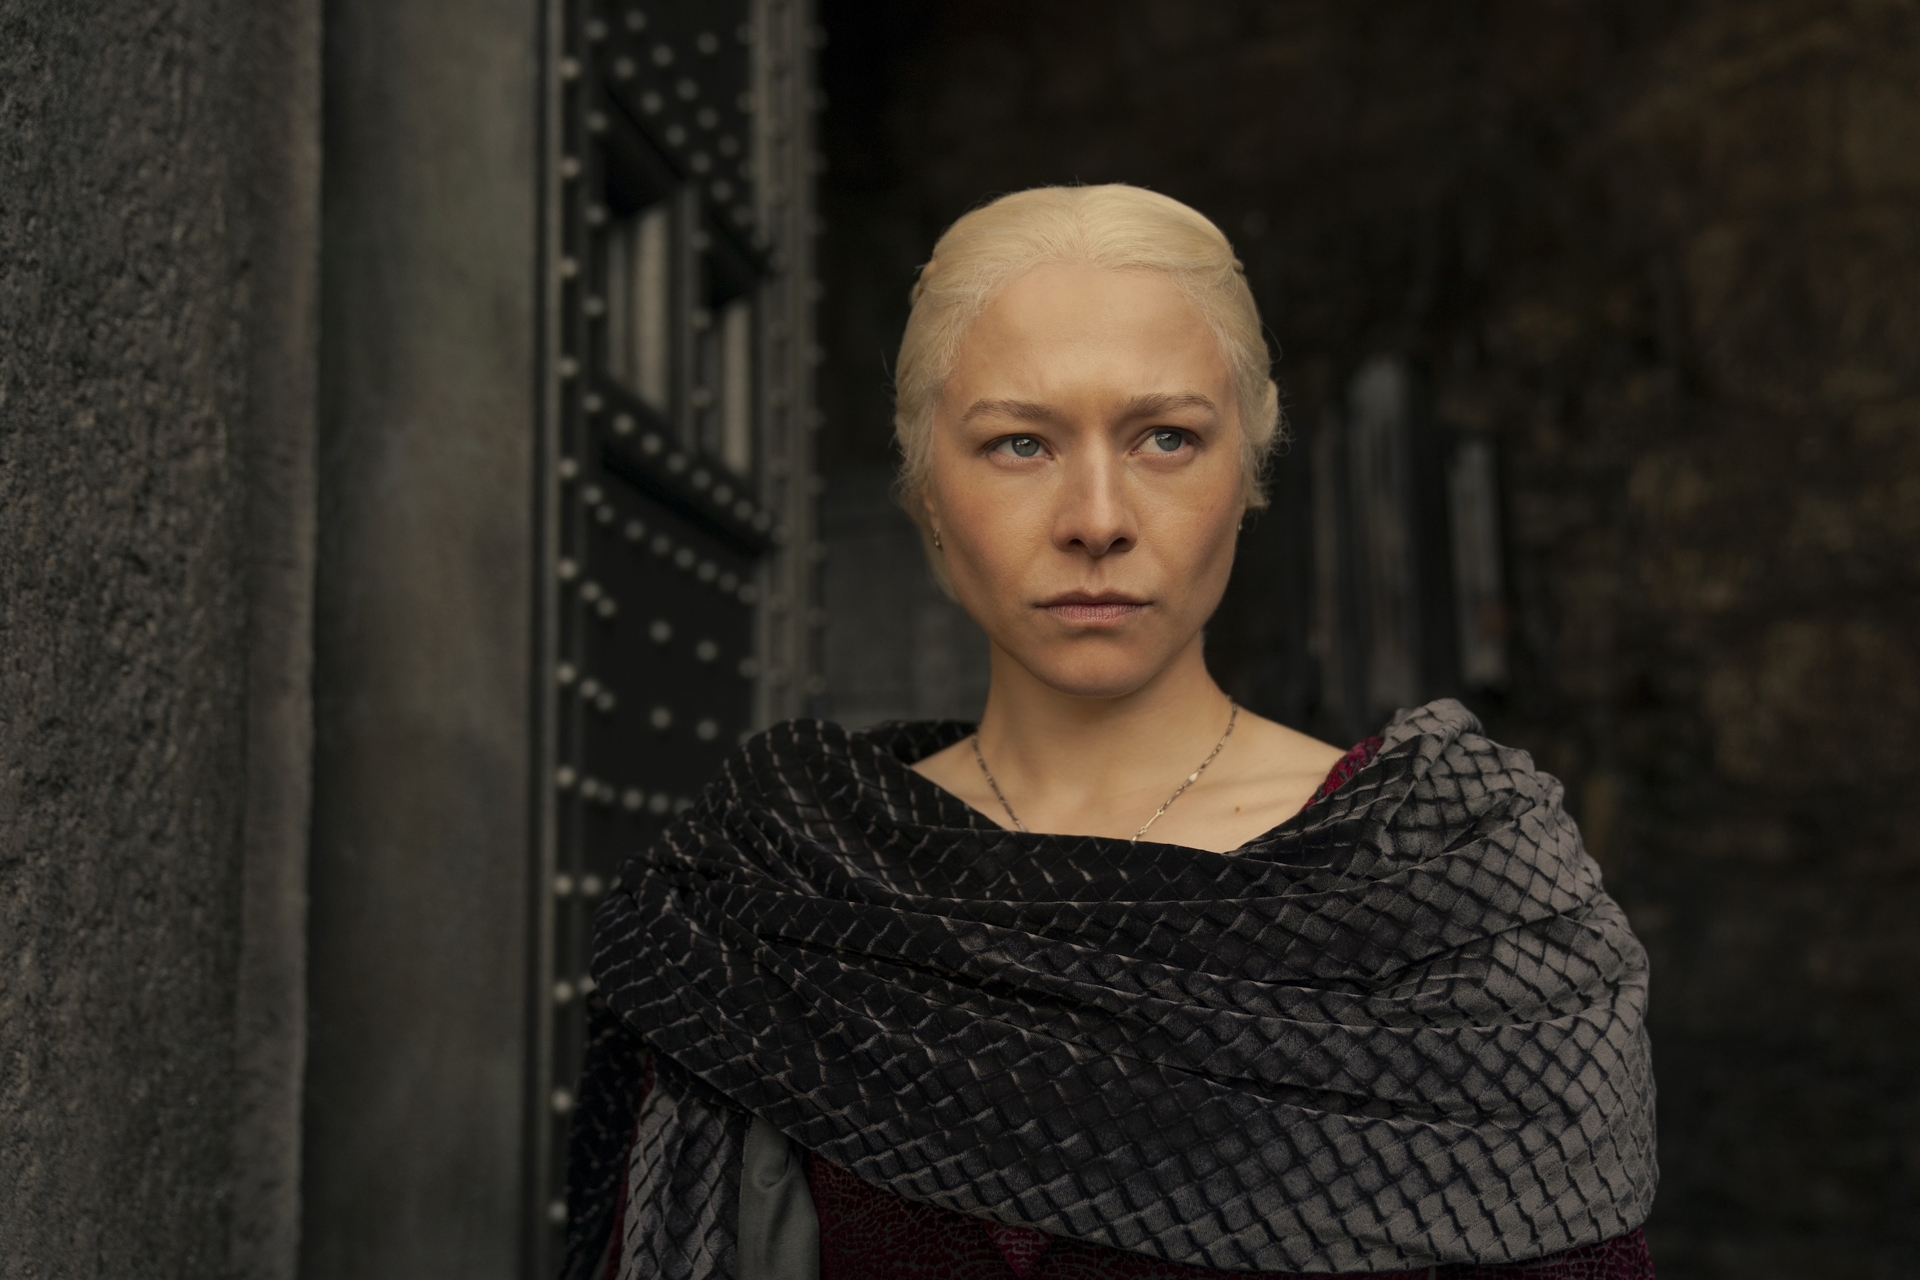 Rhaenyra, in a black power cowl, steps out of a building in episode 3 of House of the Dragon season 2